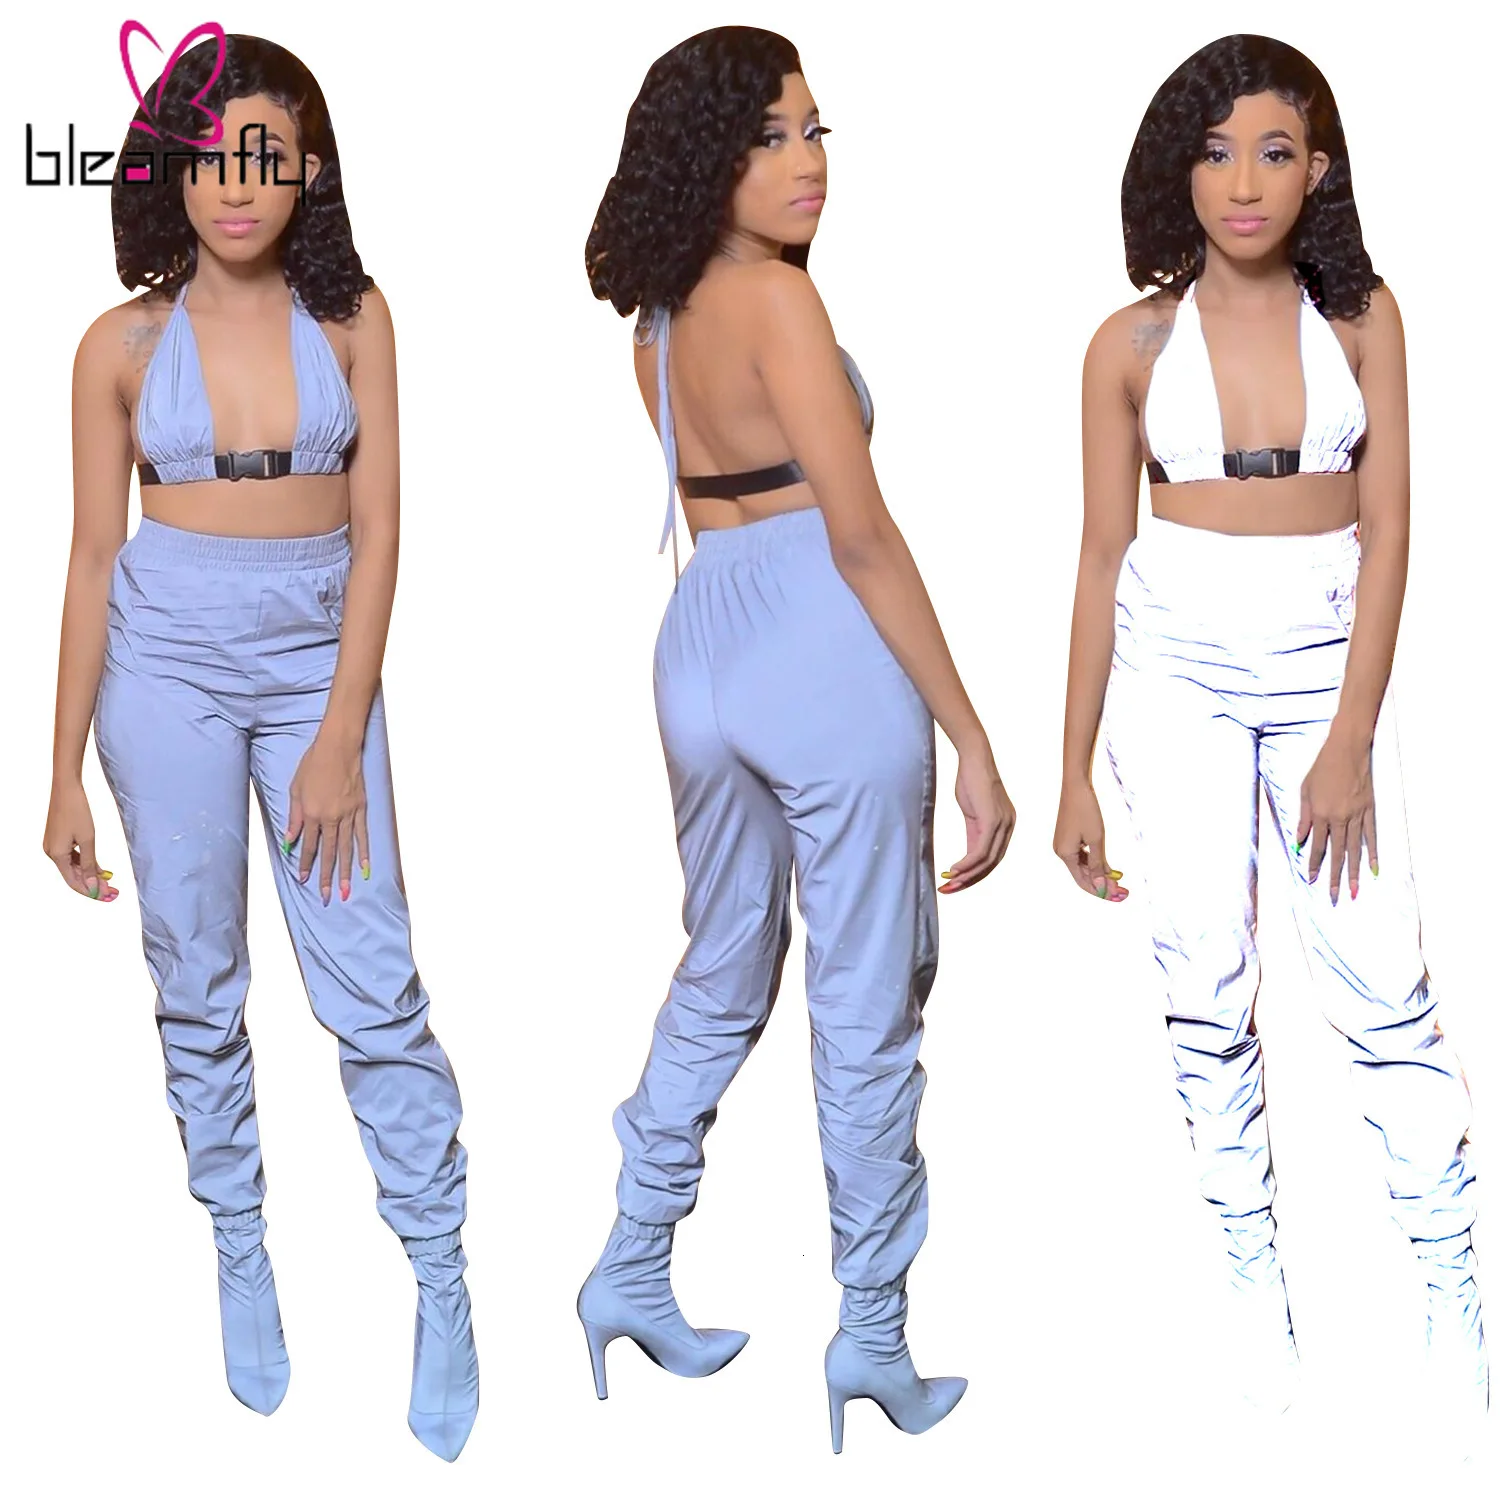 2019 Women Summer New Reflective Halter Crop Top & Slim Pants Suit Two Piece Set Casual Sporting Tracksuit Fashion Sexy Outfits | Женская